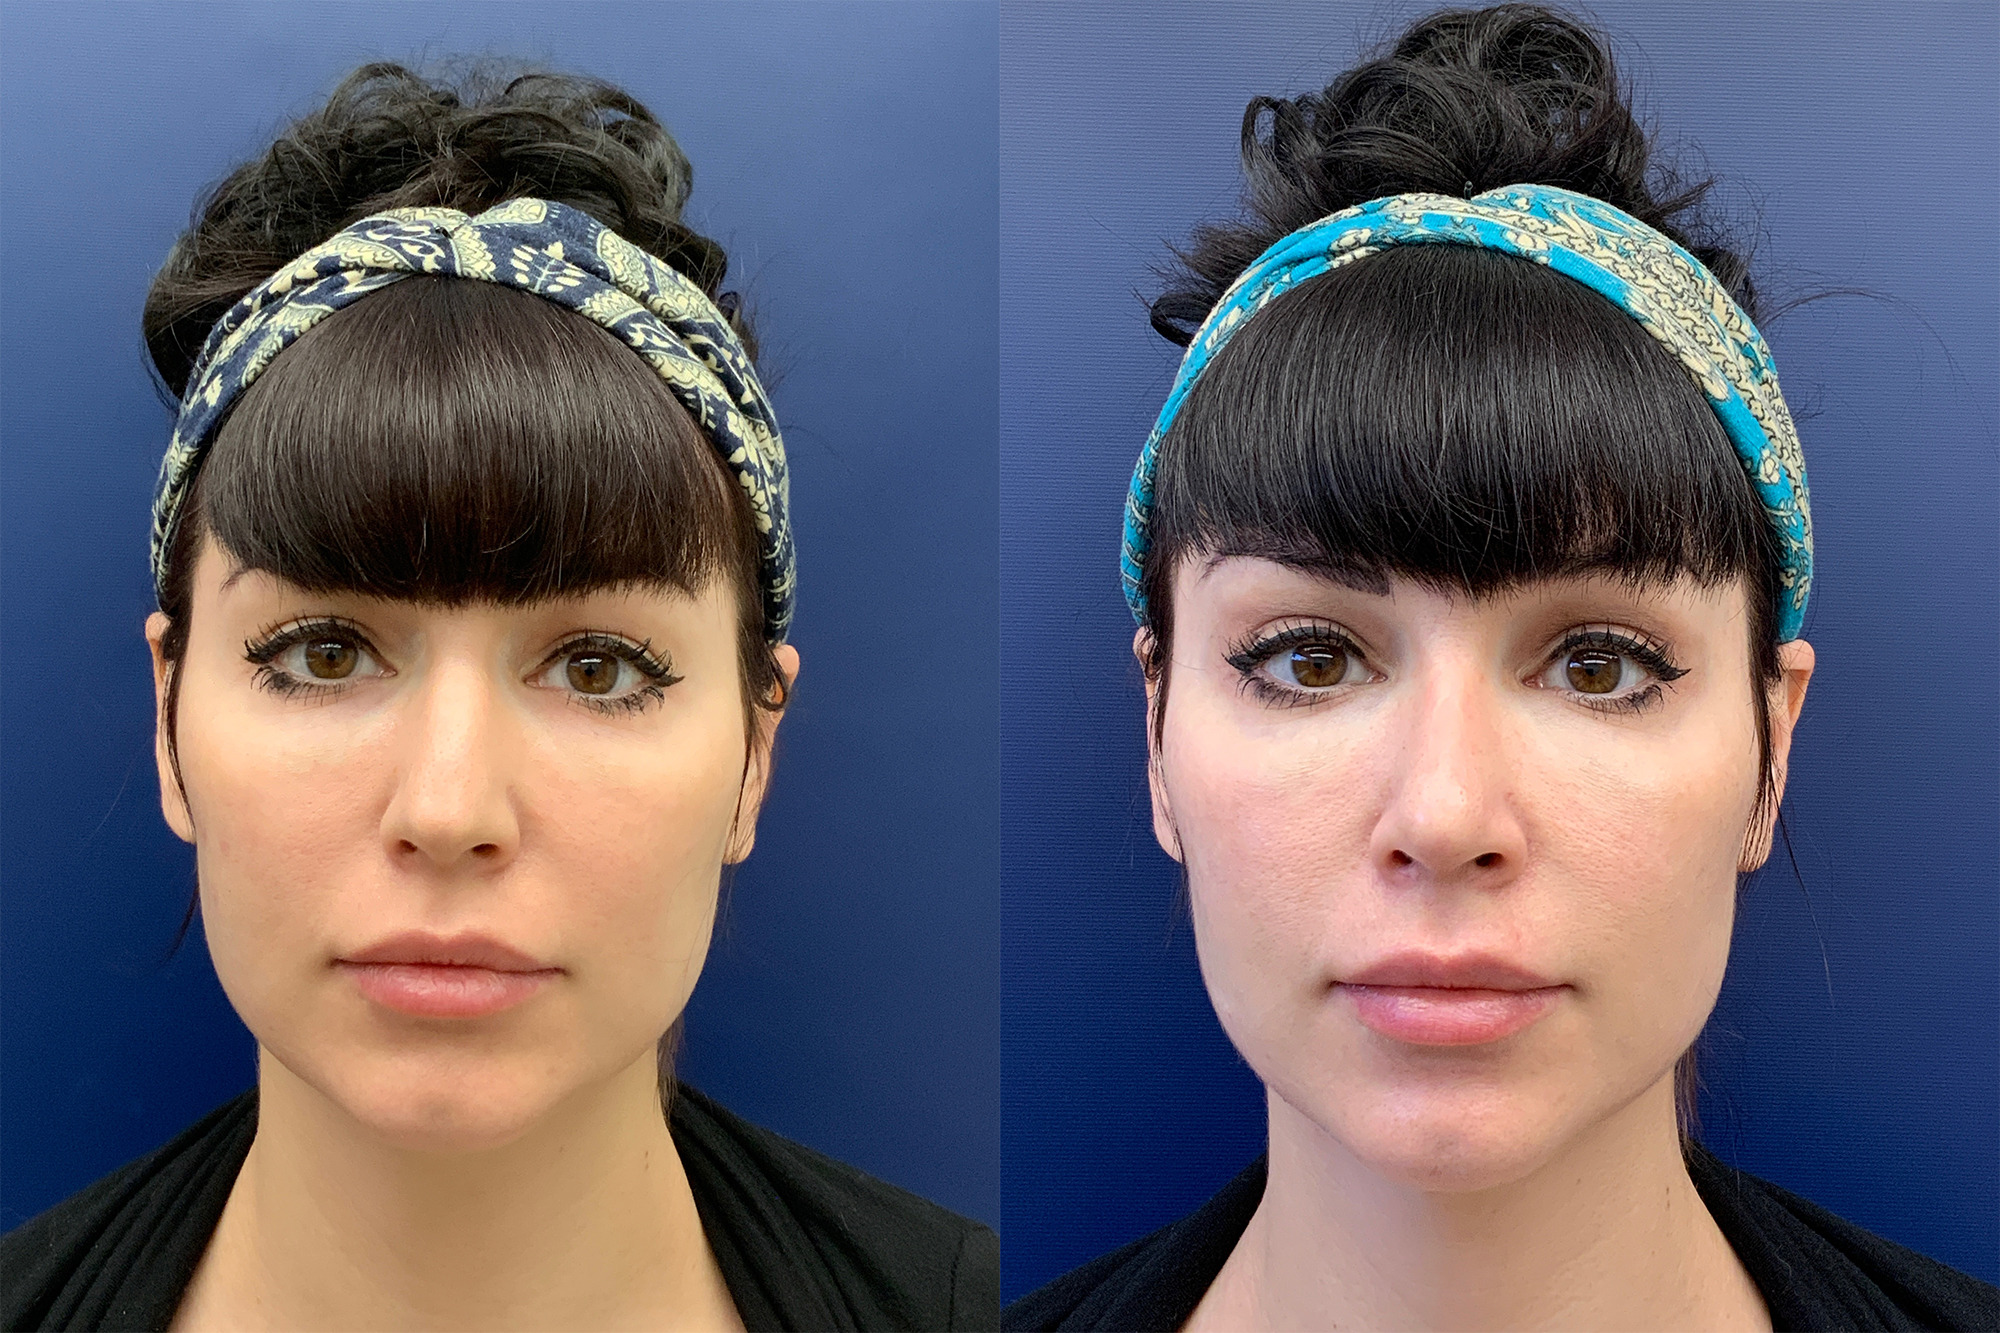 Rhinoplasty Before and After Photo by Dr. Butler in Pensacola Florida